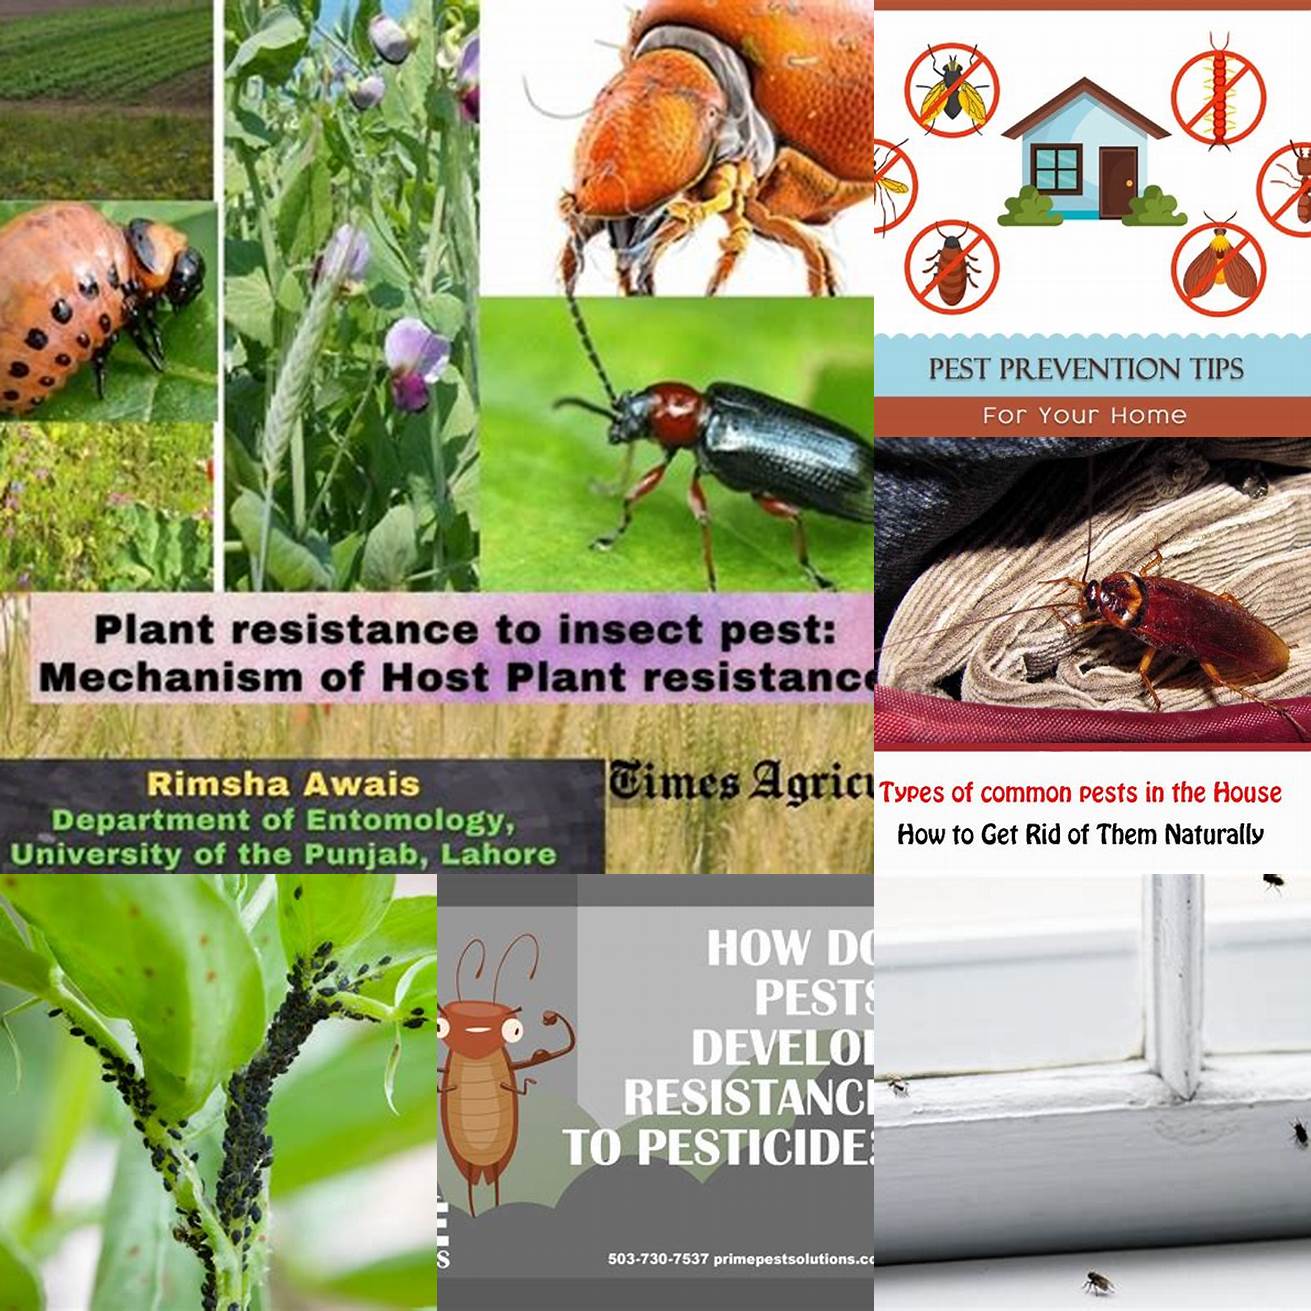 Resistant to moisture and pests